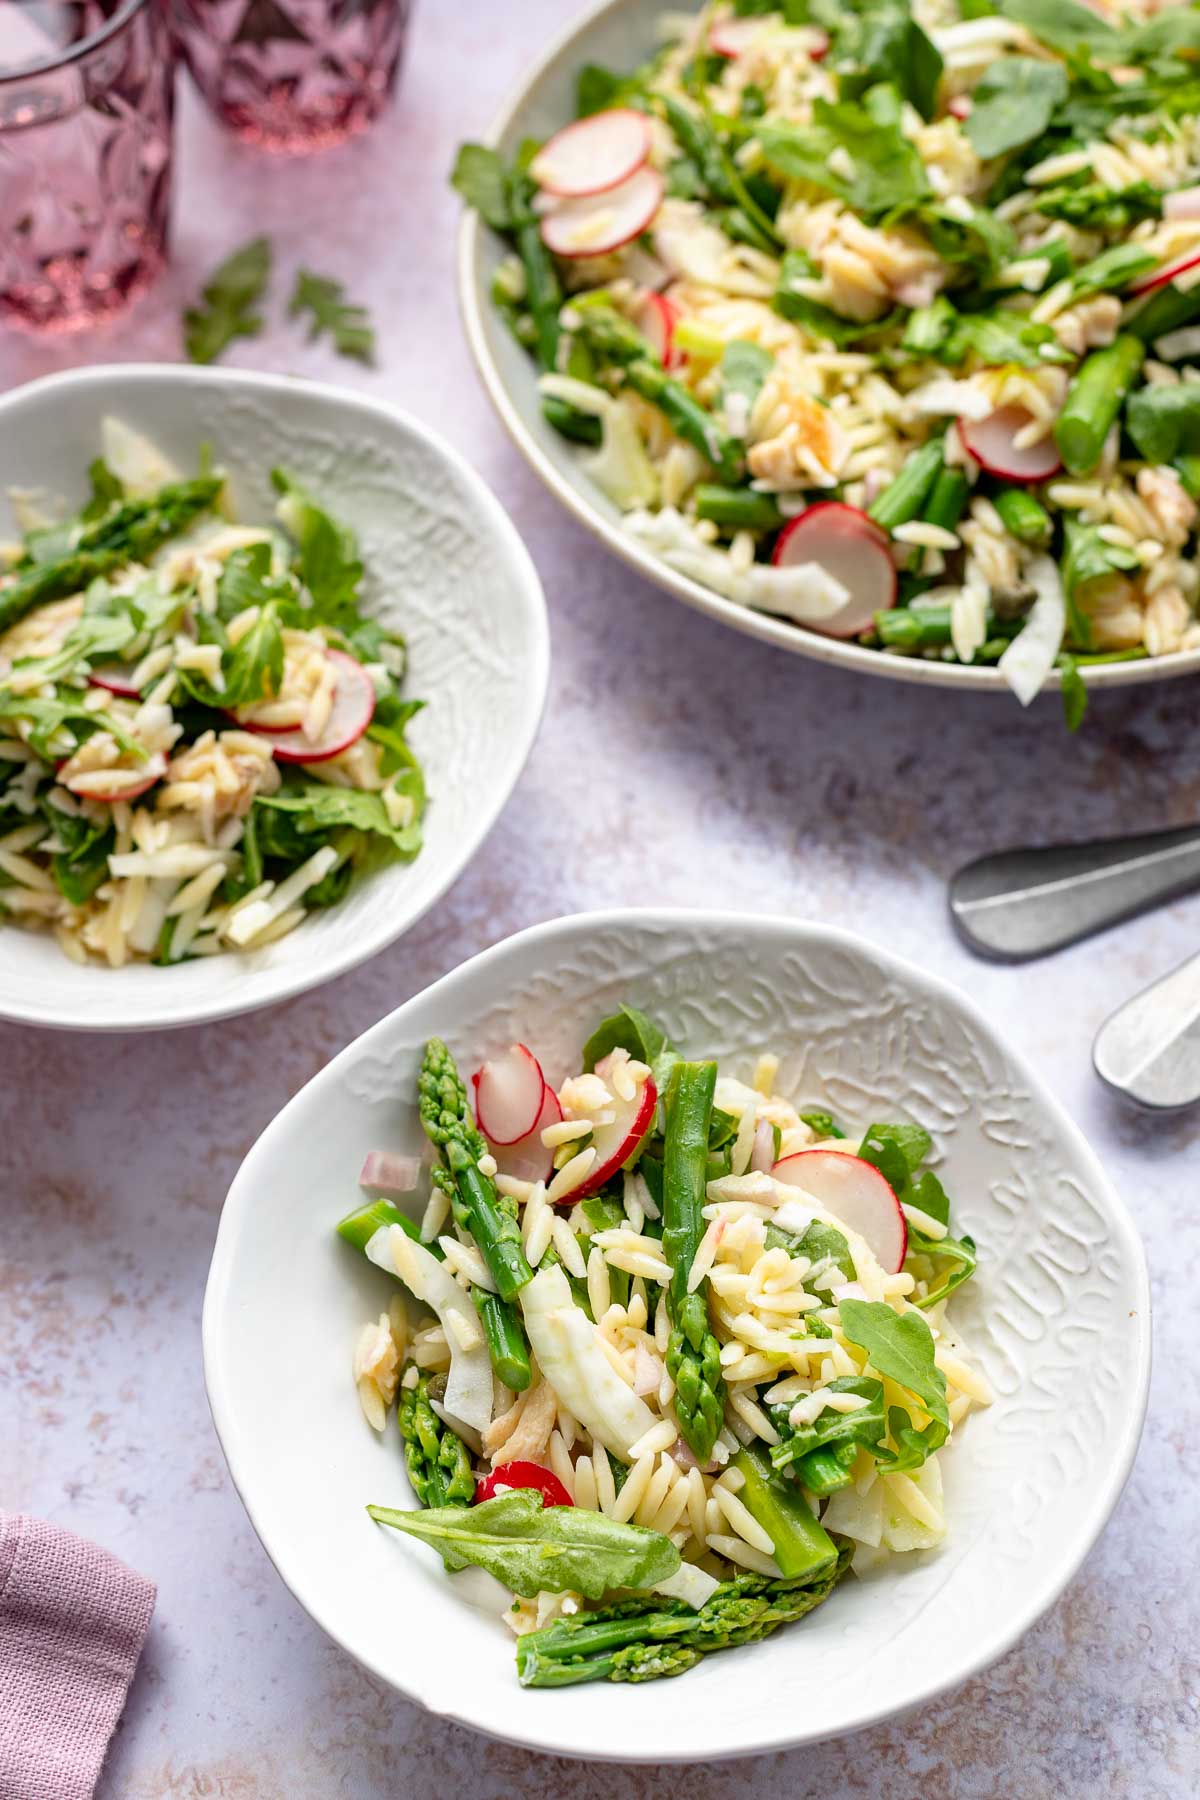 Smoked Trout Pasta Salad with Asparagus & Fennel